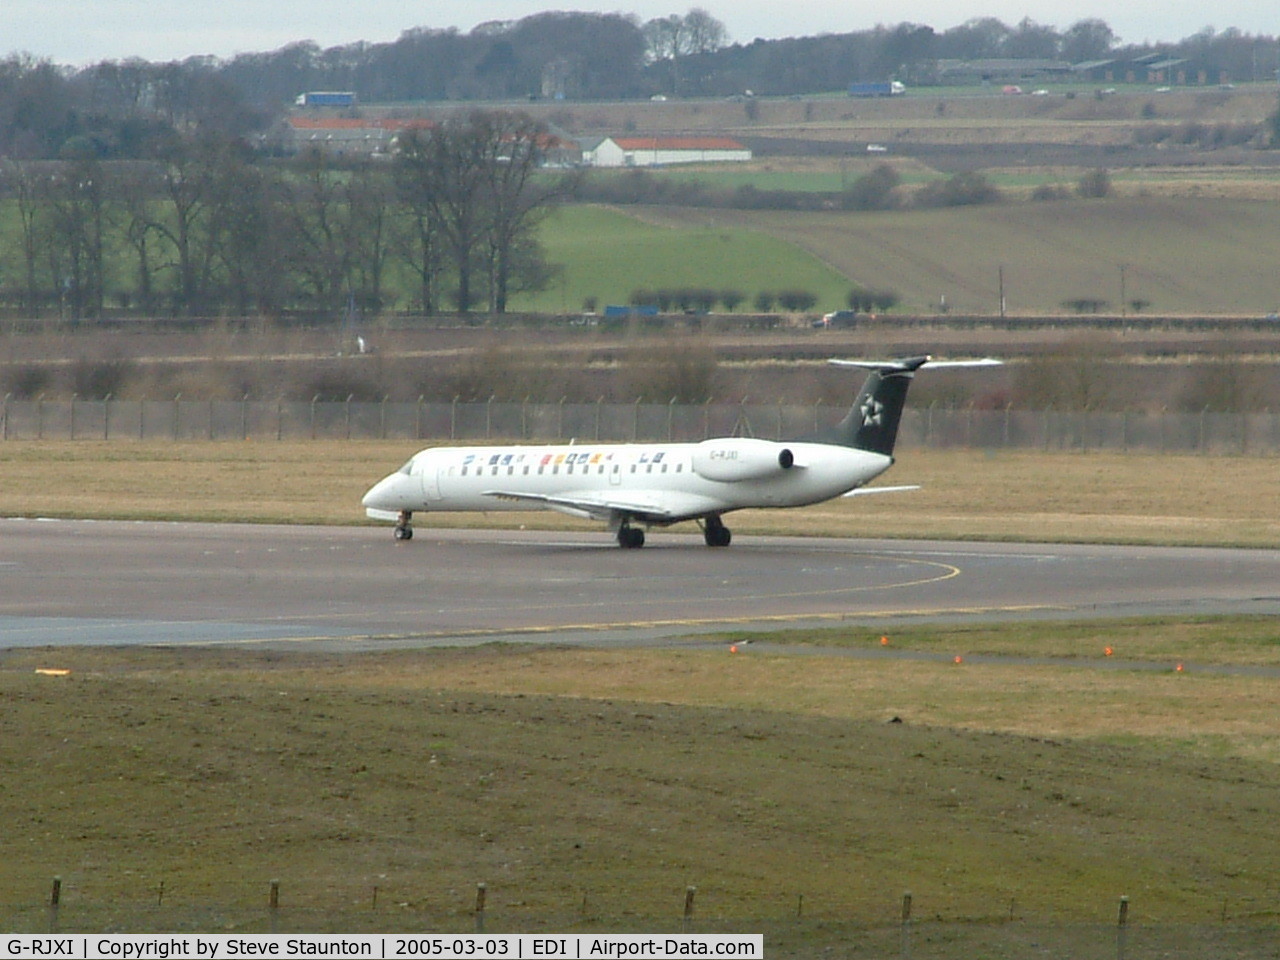 G-RJXI, 2001 Embraer EMB-145EP (ERJ-145EP) C/N 145454, Taken on a cold March afternoon at Edinburgh Airport